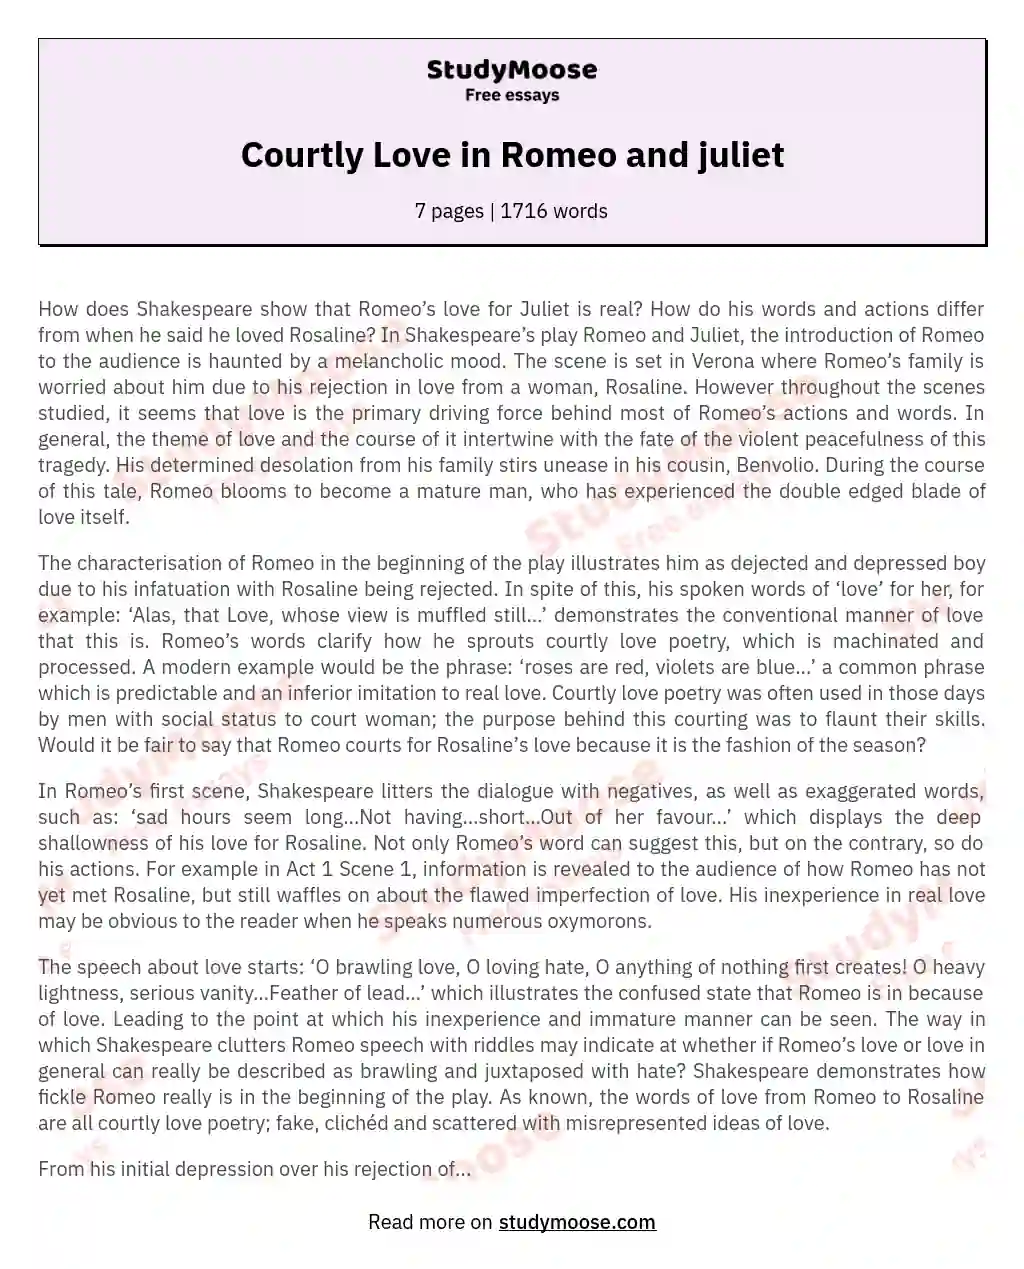 Courtly Love in Romeo and juliet essay